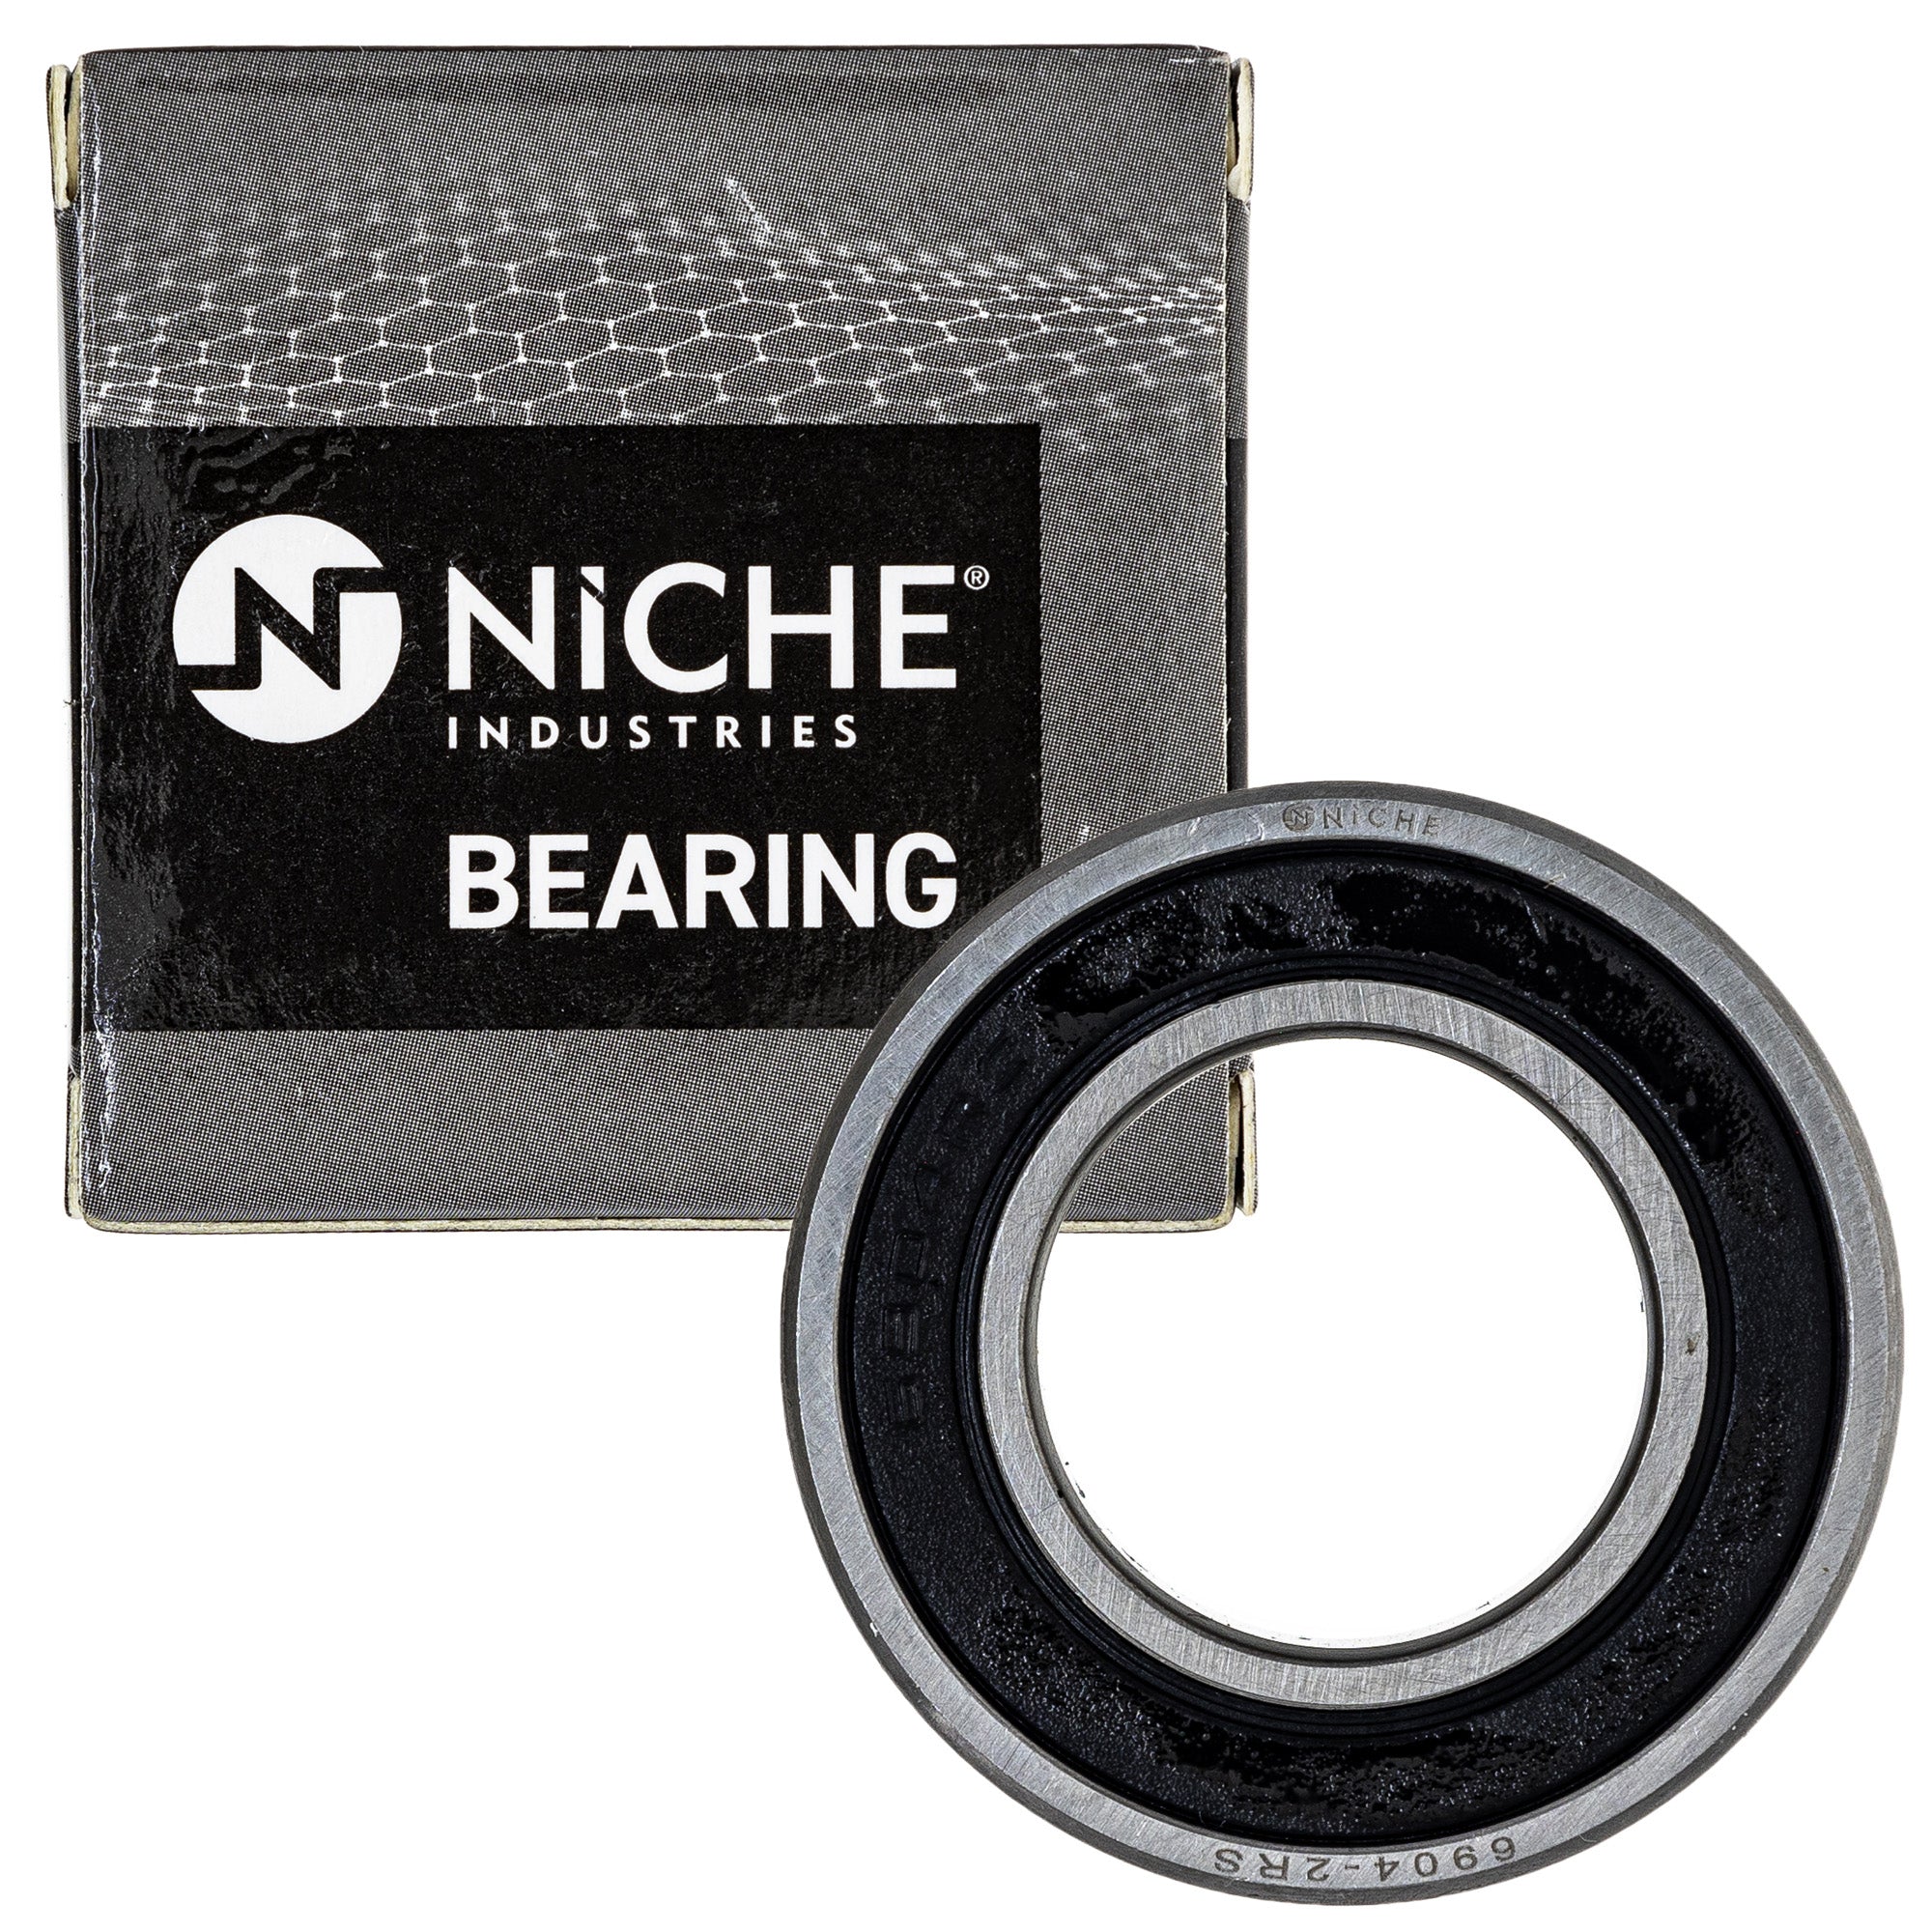 NICHE MK1009103 Wheel Bearing Seal Kit for zOTHER YZ450F YZ426F